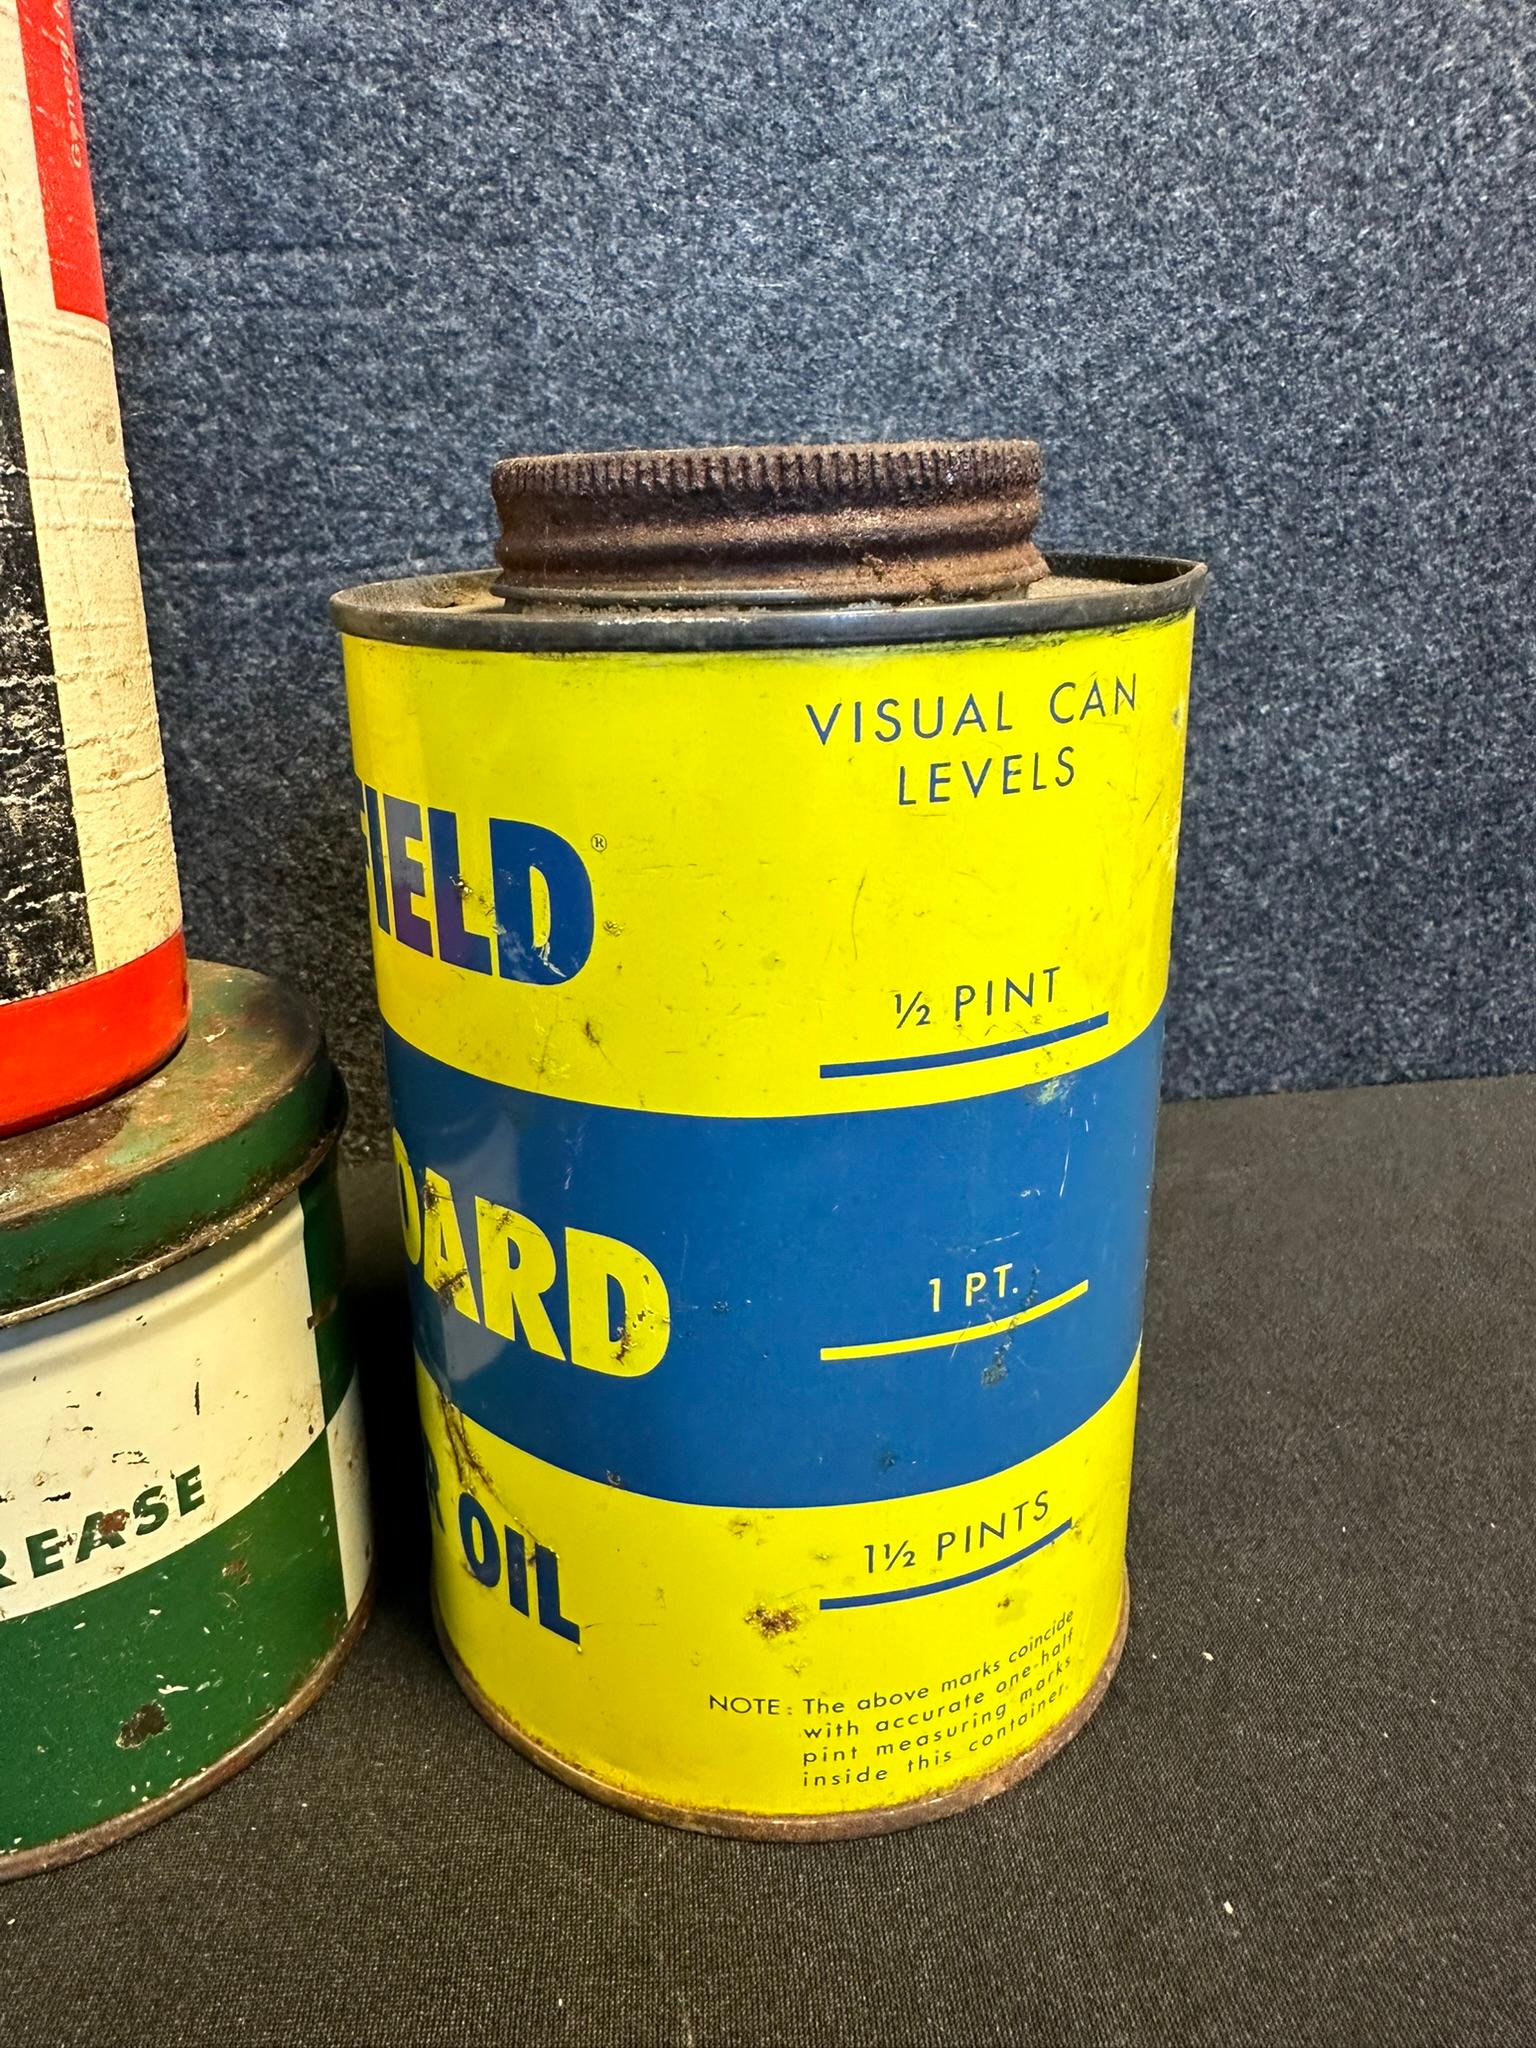 Lot 5 Early Advertising Oil Cans: Fiberol, Long Run Lubricant, GM Fire Extinguisher